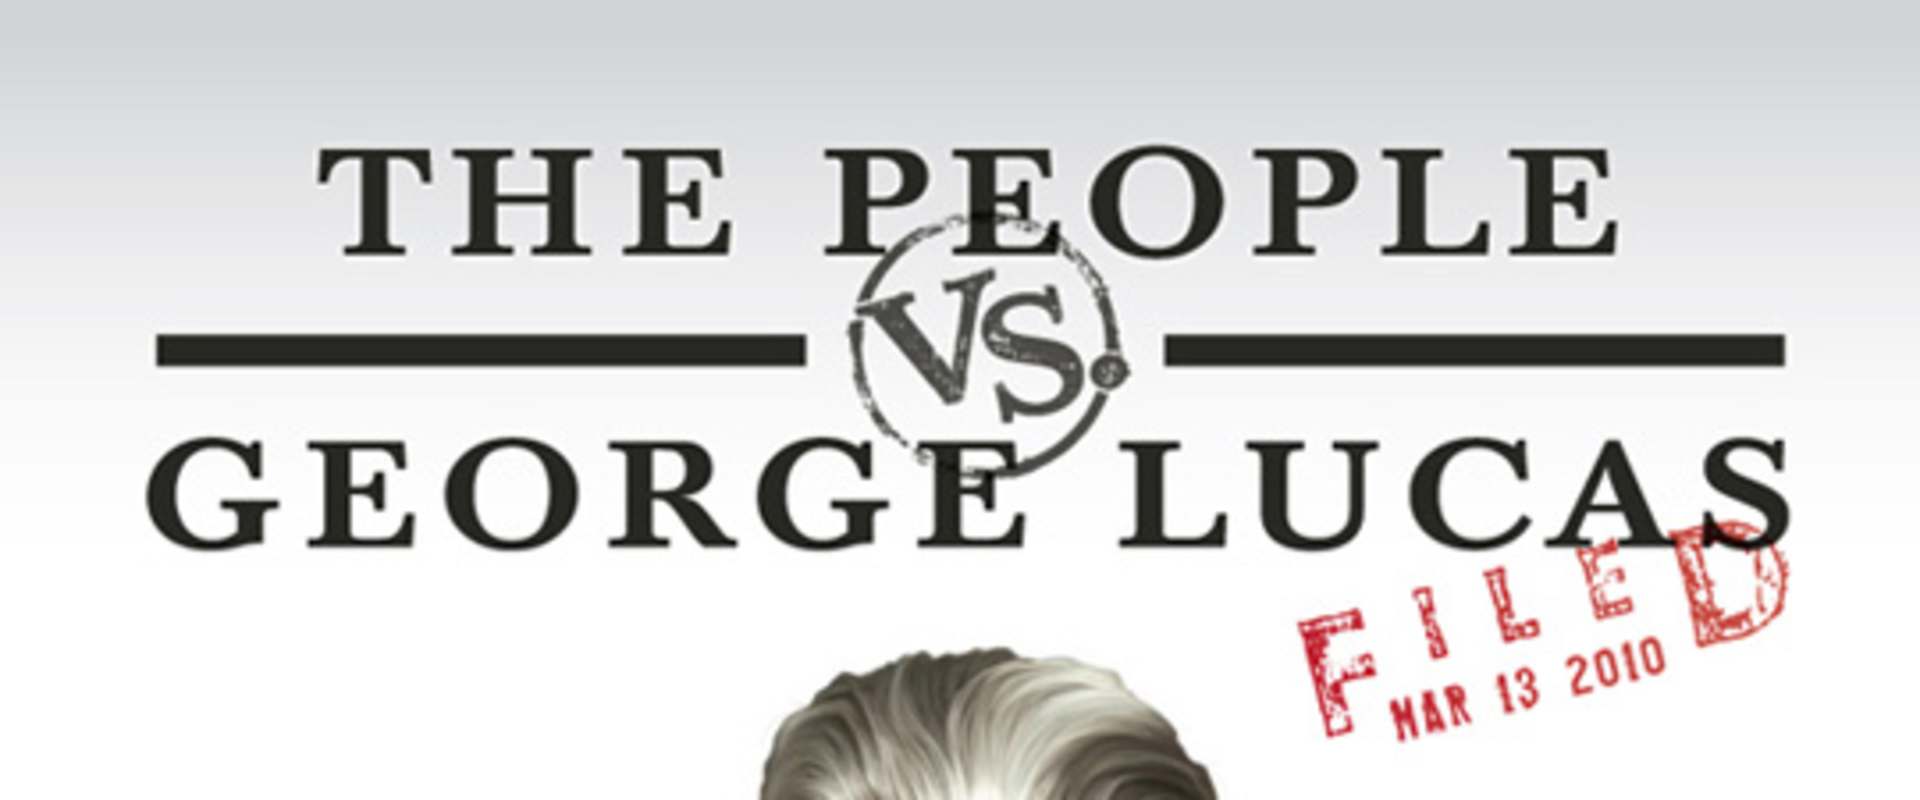 The People vs. George Lucas background 2